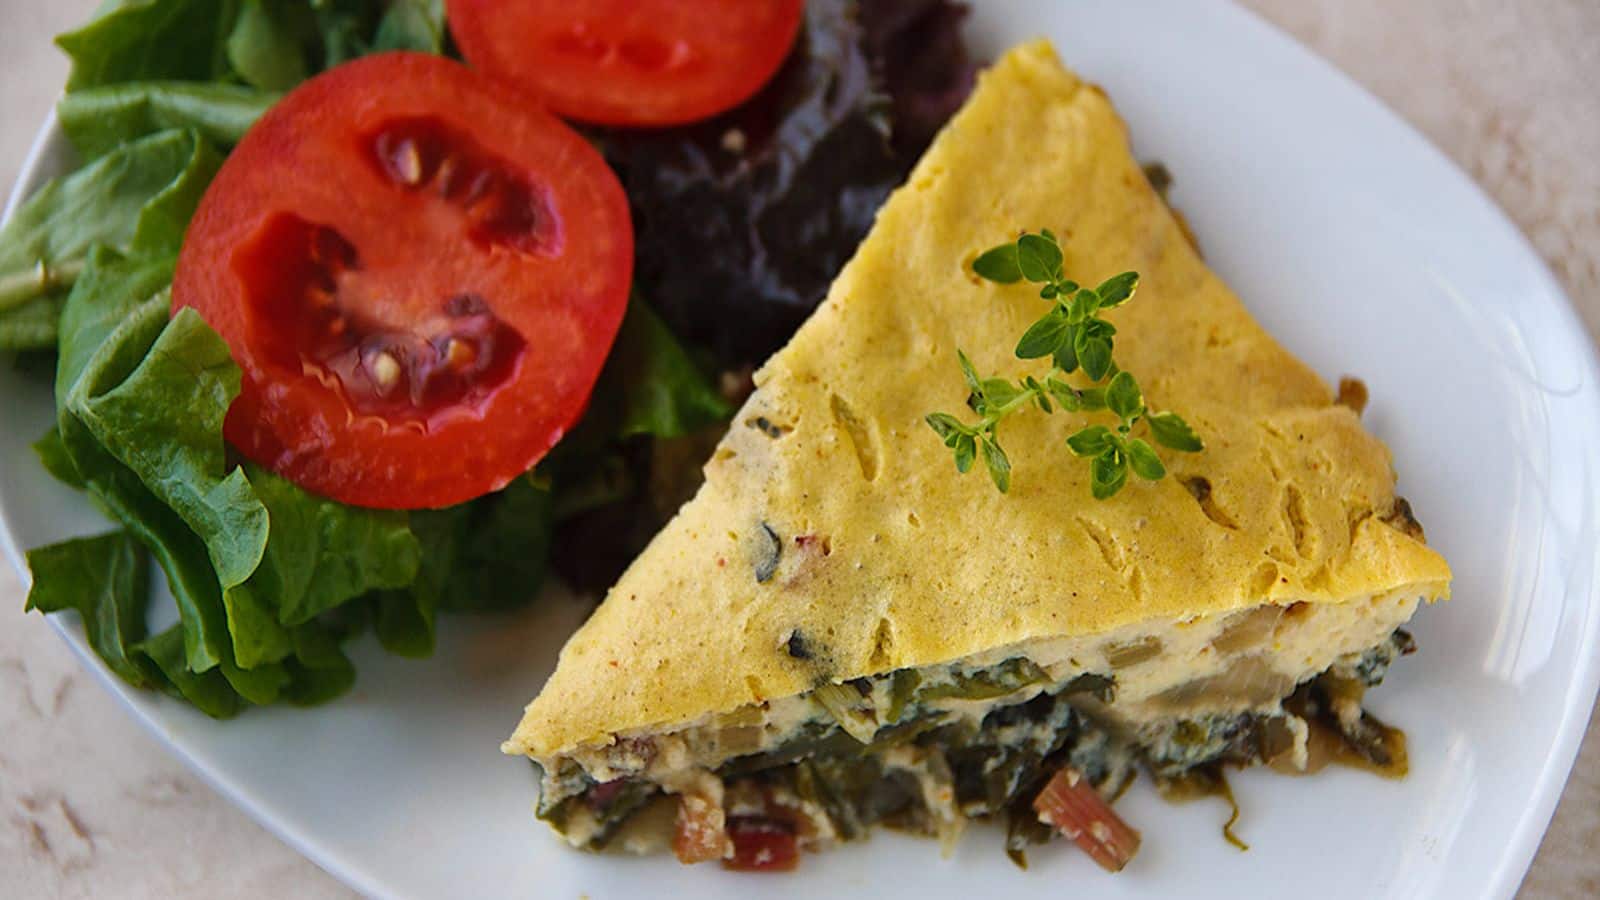 Impress your guests with this scrumptious Swiss chard quiche